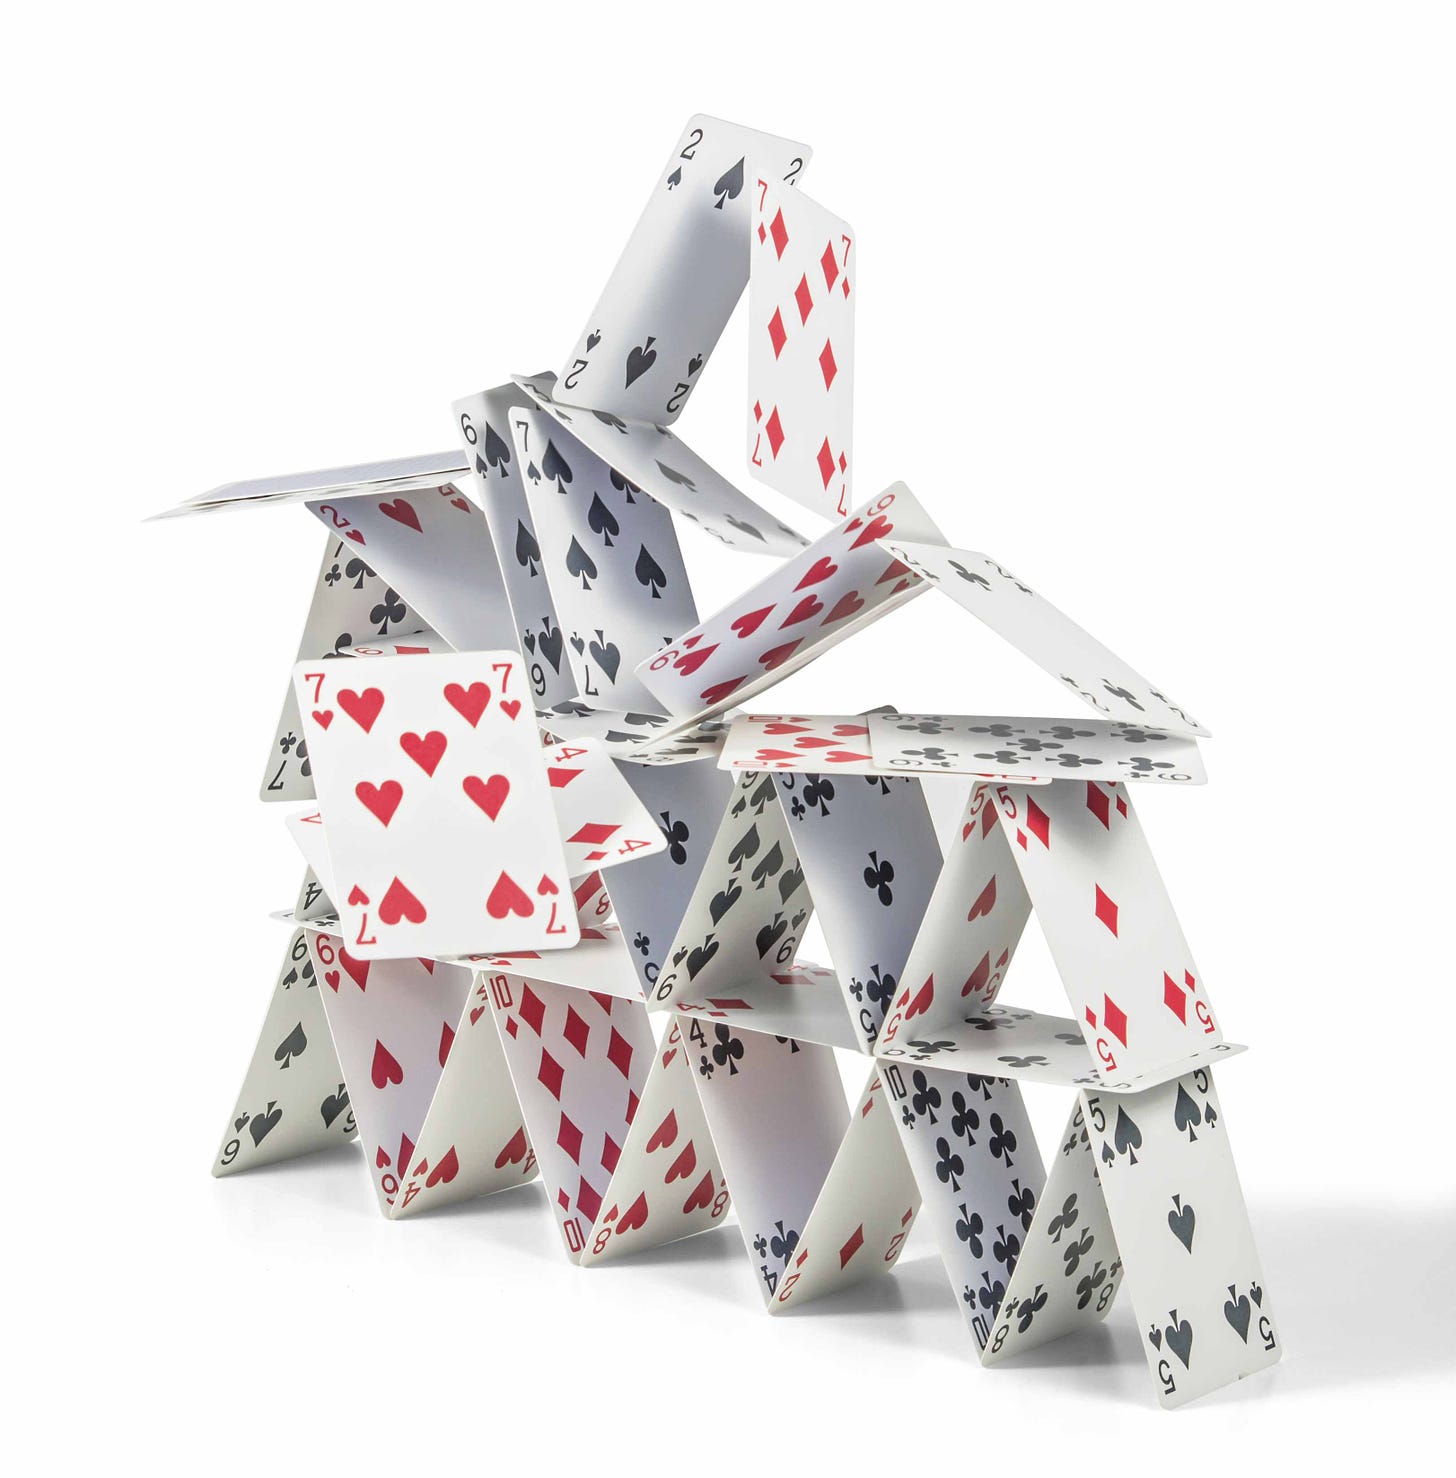 Wall Street's House of Cards: Let's Play Bankster Three Card Monte ...